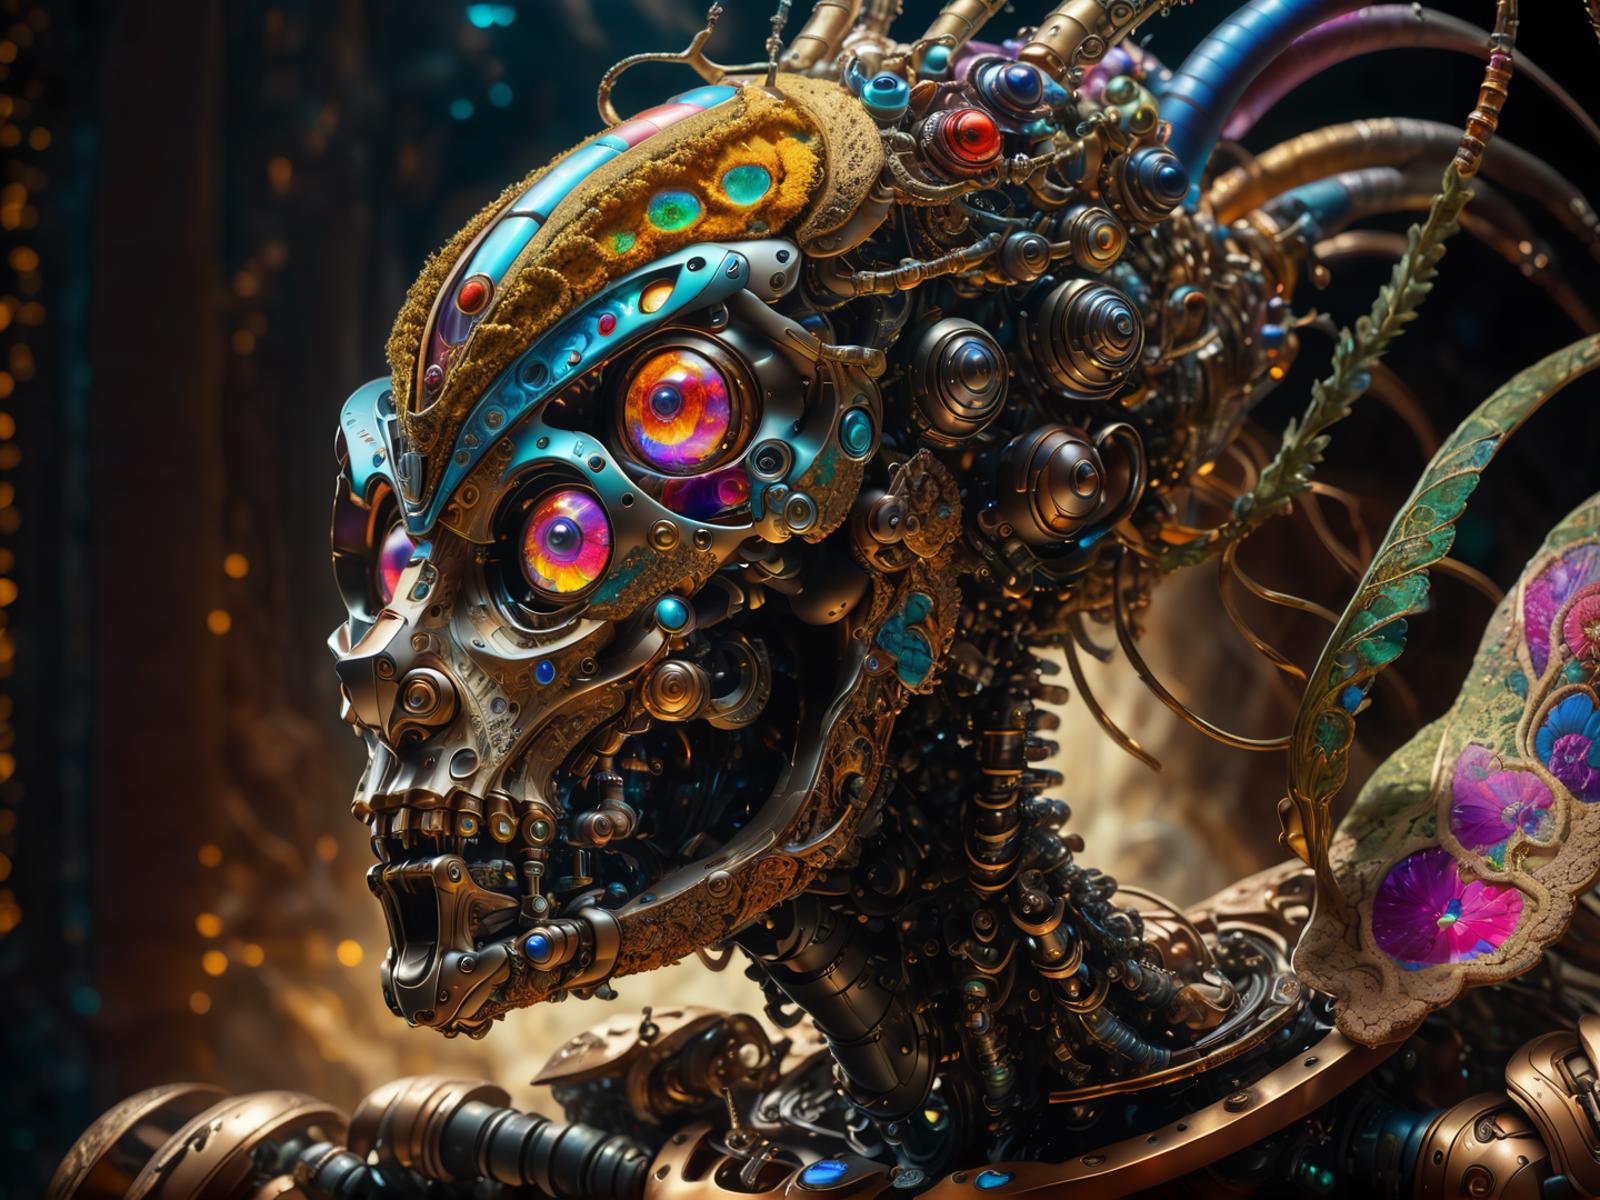 A robotic head with colorful jewels and gears on its face.